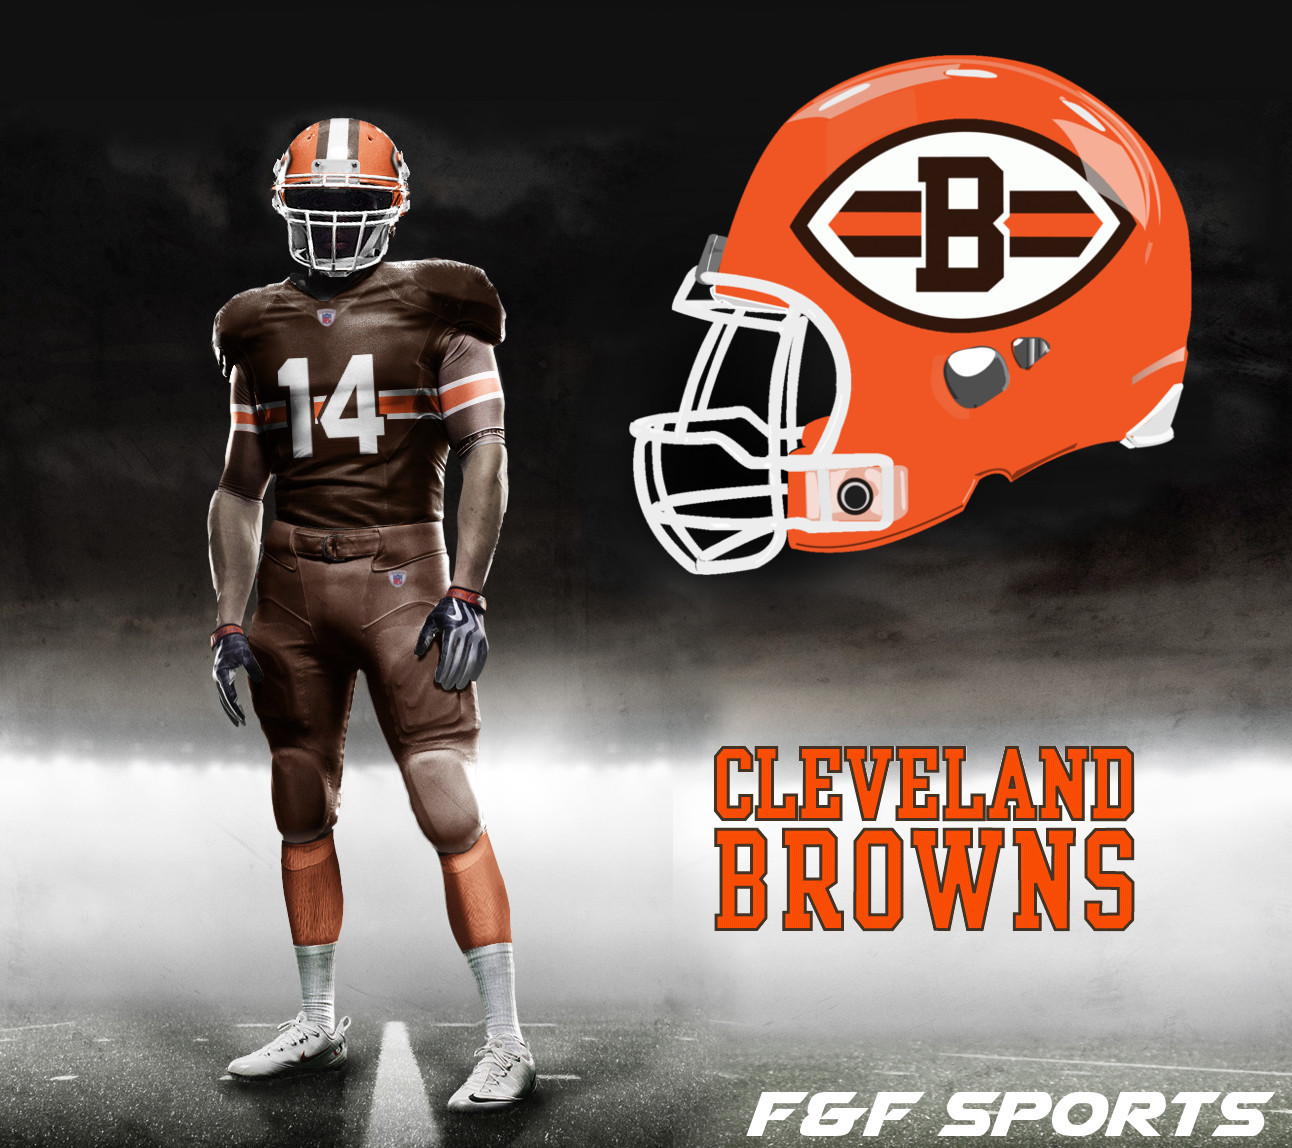 browns-concept-2-home-3.jpg